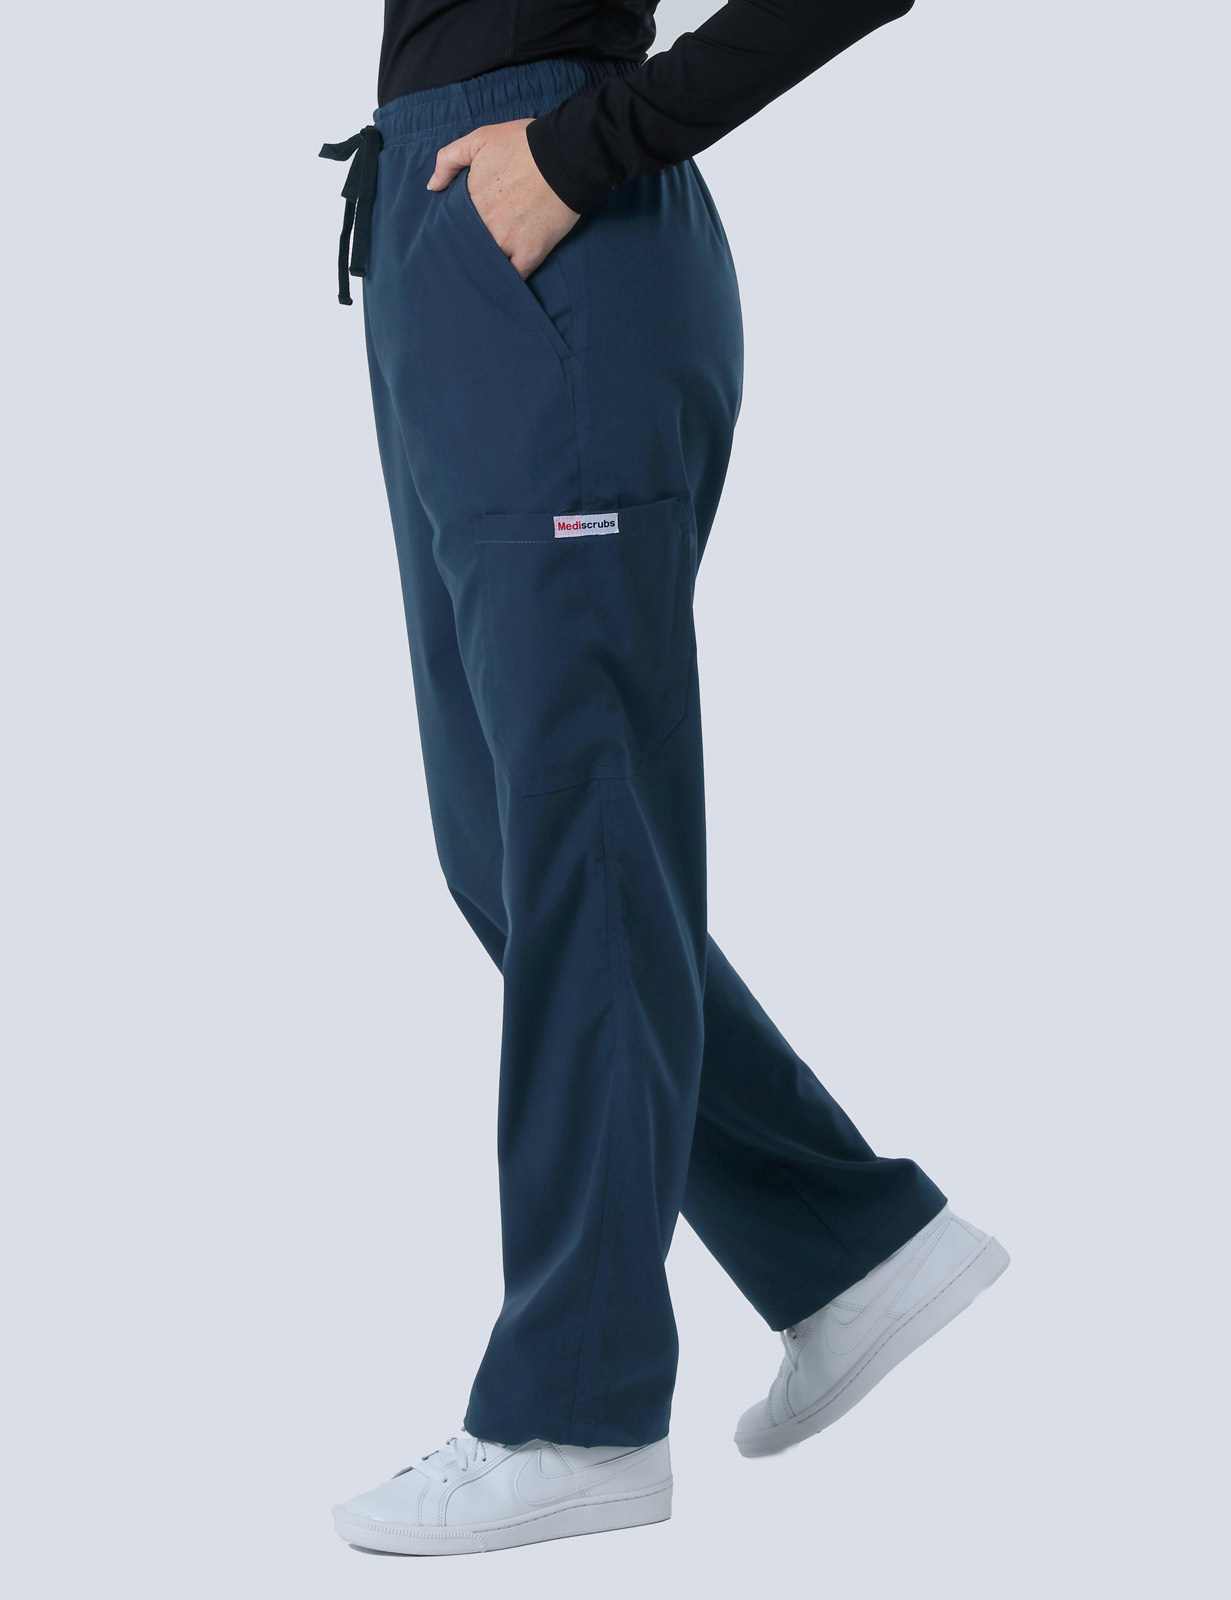 Western Private Hospital Surgical Ward Uniform Set Bundle ( 4 Pocket Top and Cargo Pants in Navy incl Logo)